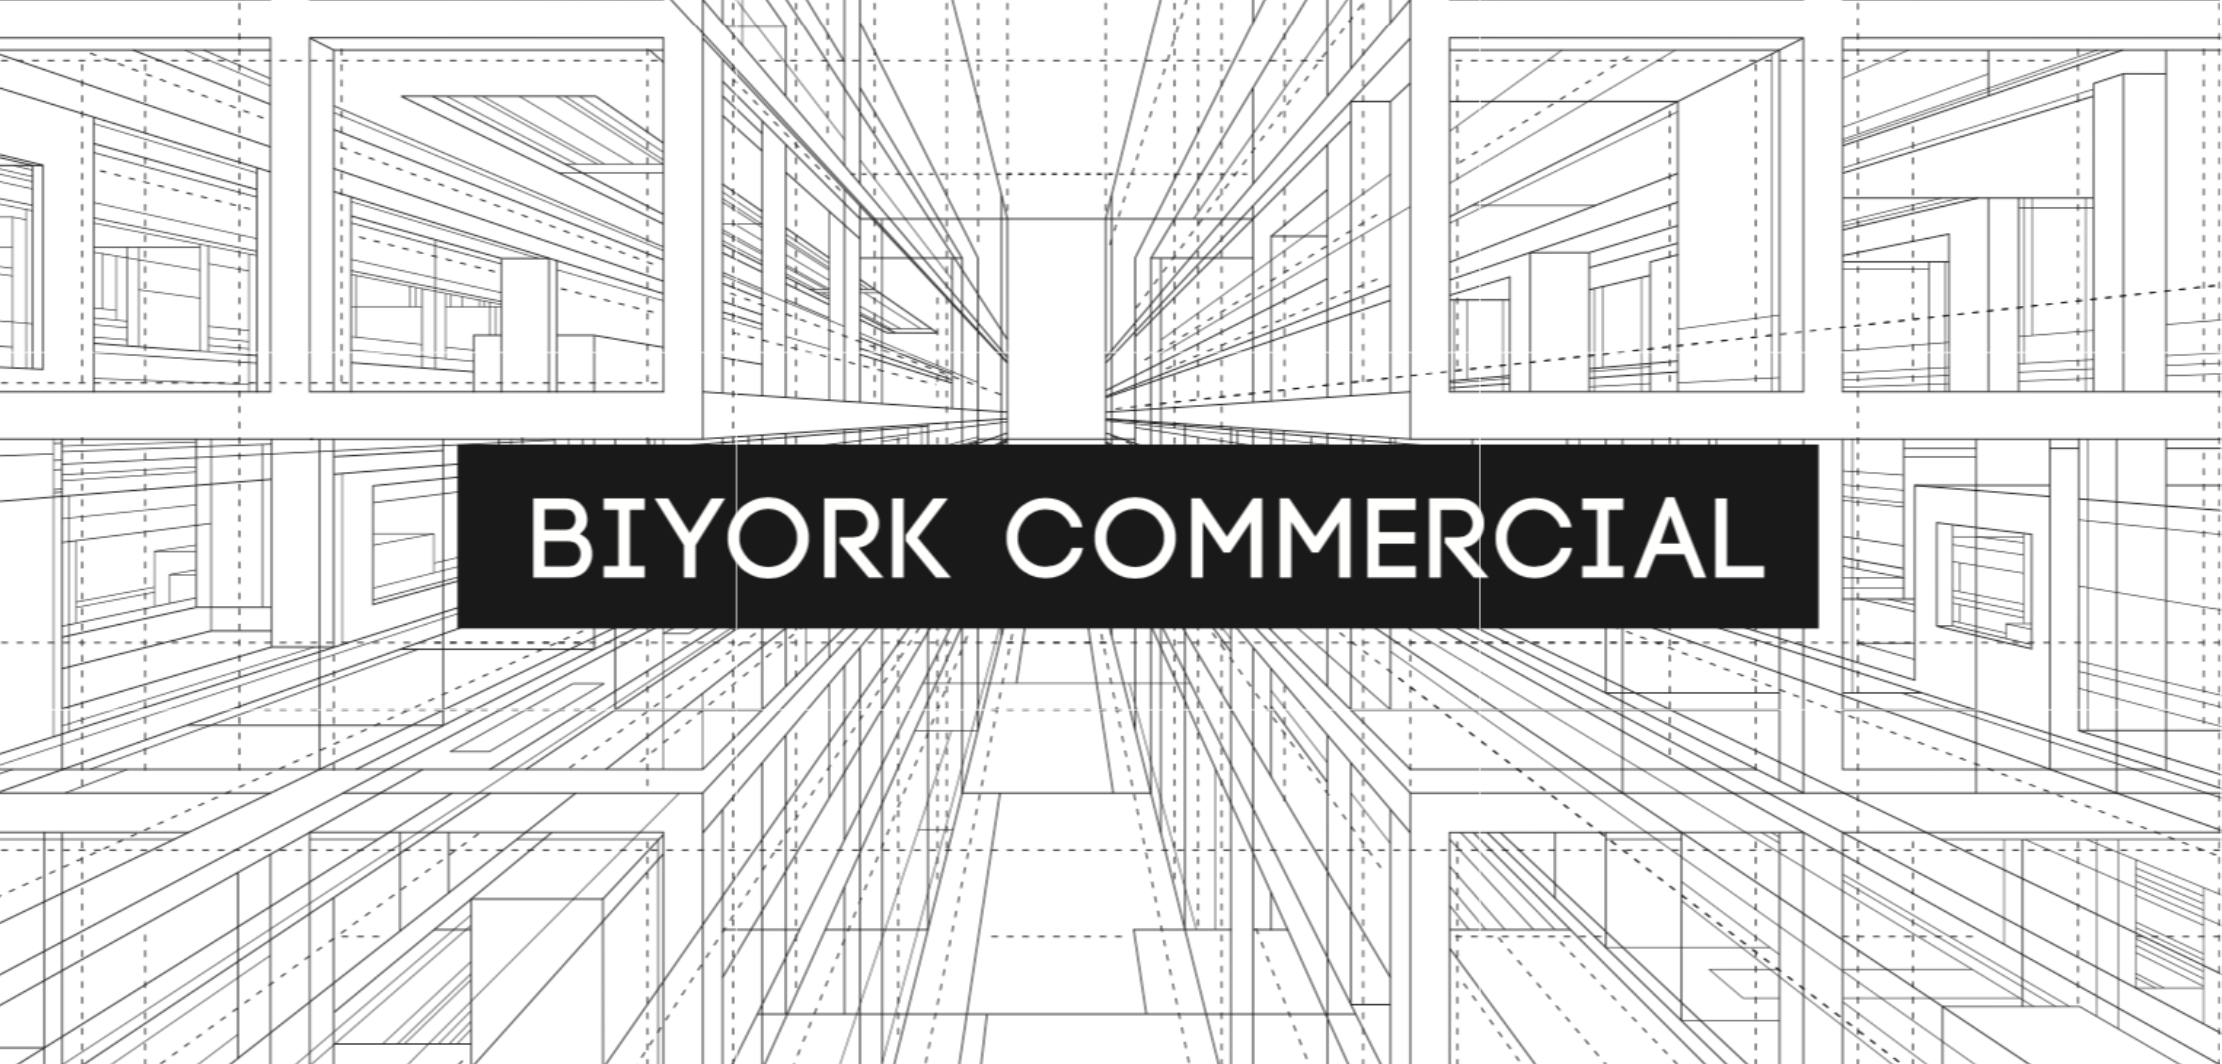 BIYORK Created Commercial Division